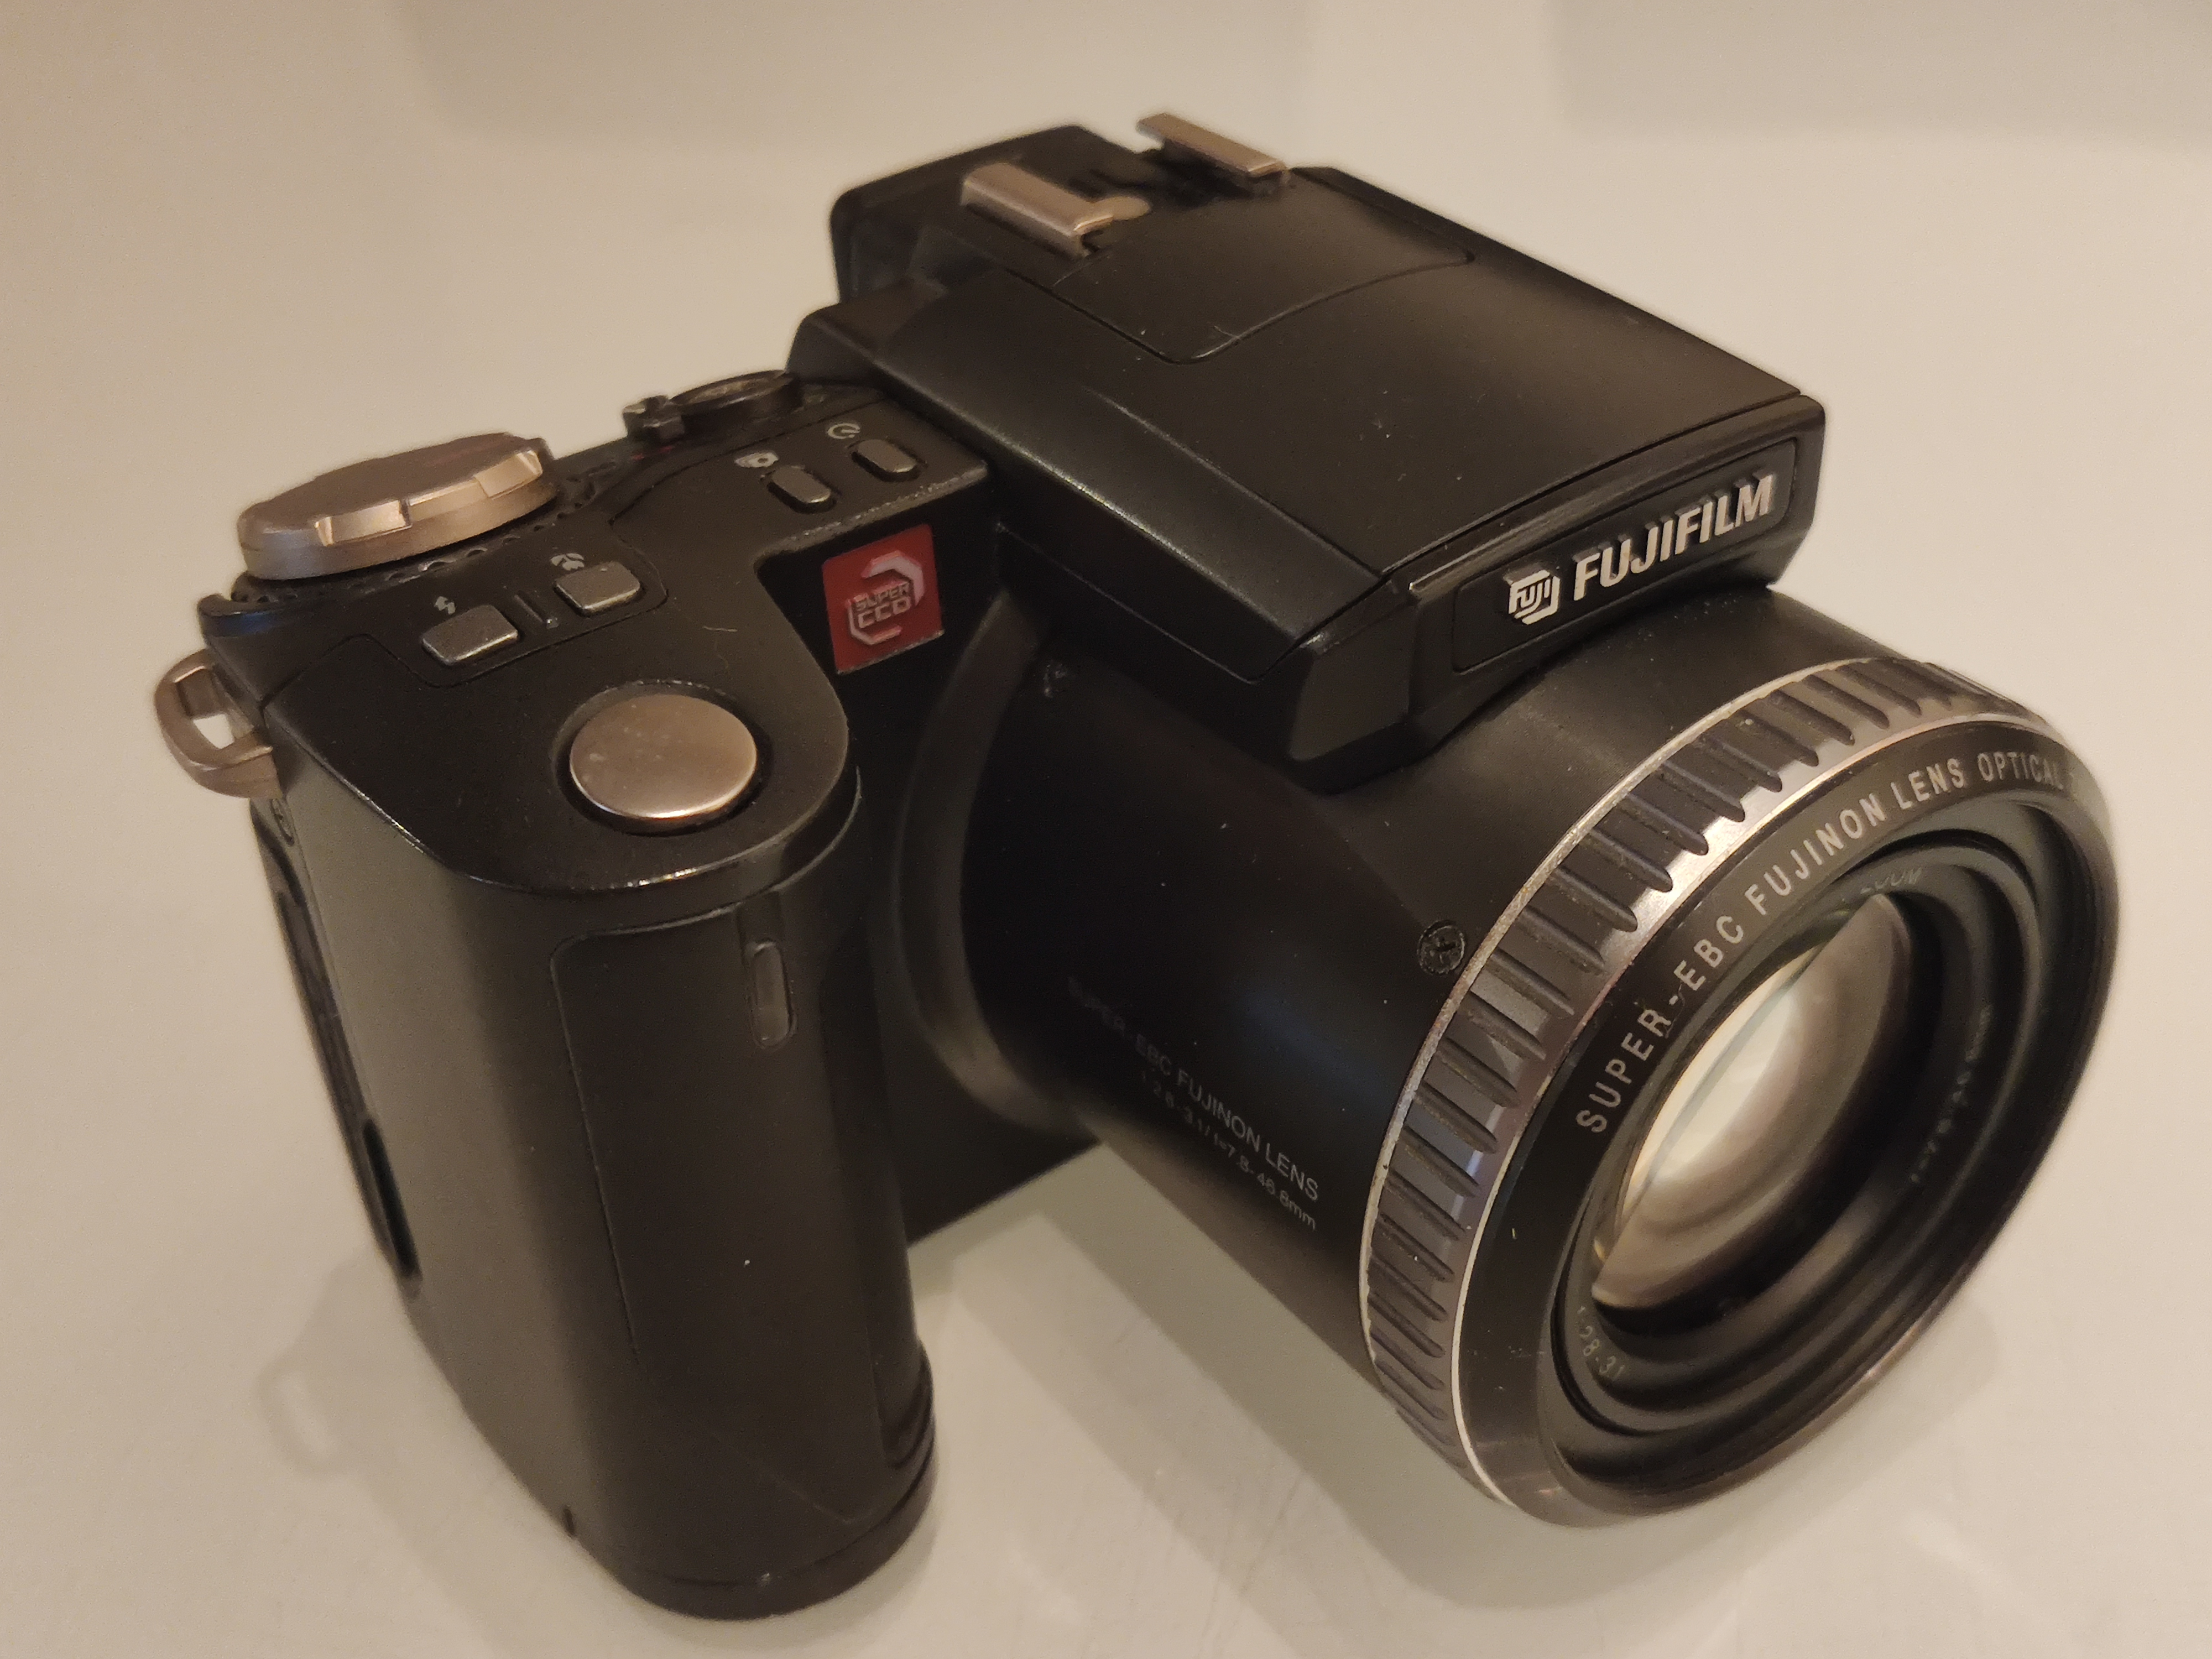 A Fujifilm S6900 Zoom Digital Camera With Battery, Memory Card, Leads and Case. - Image 3 of 4